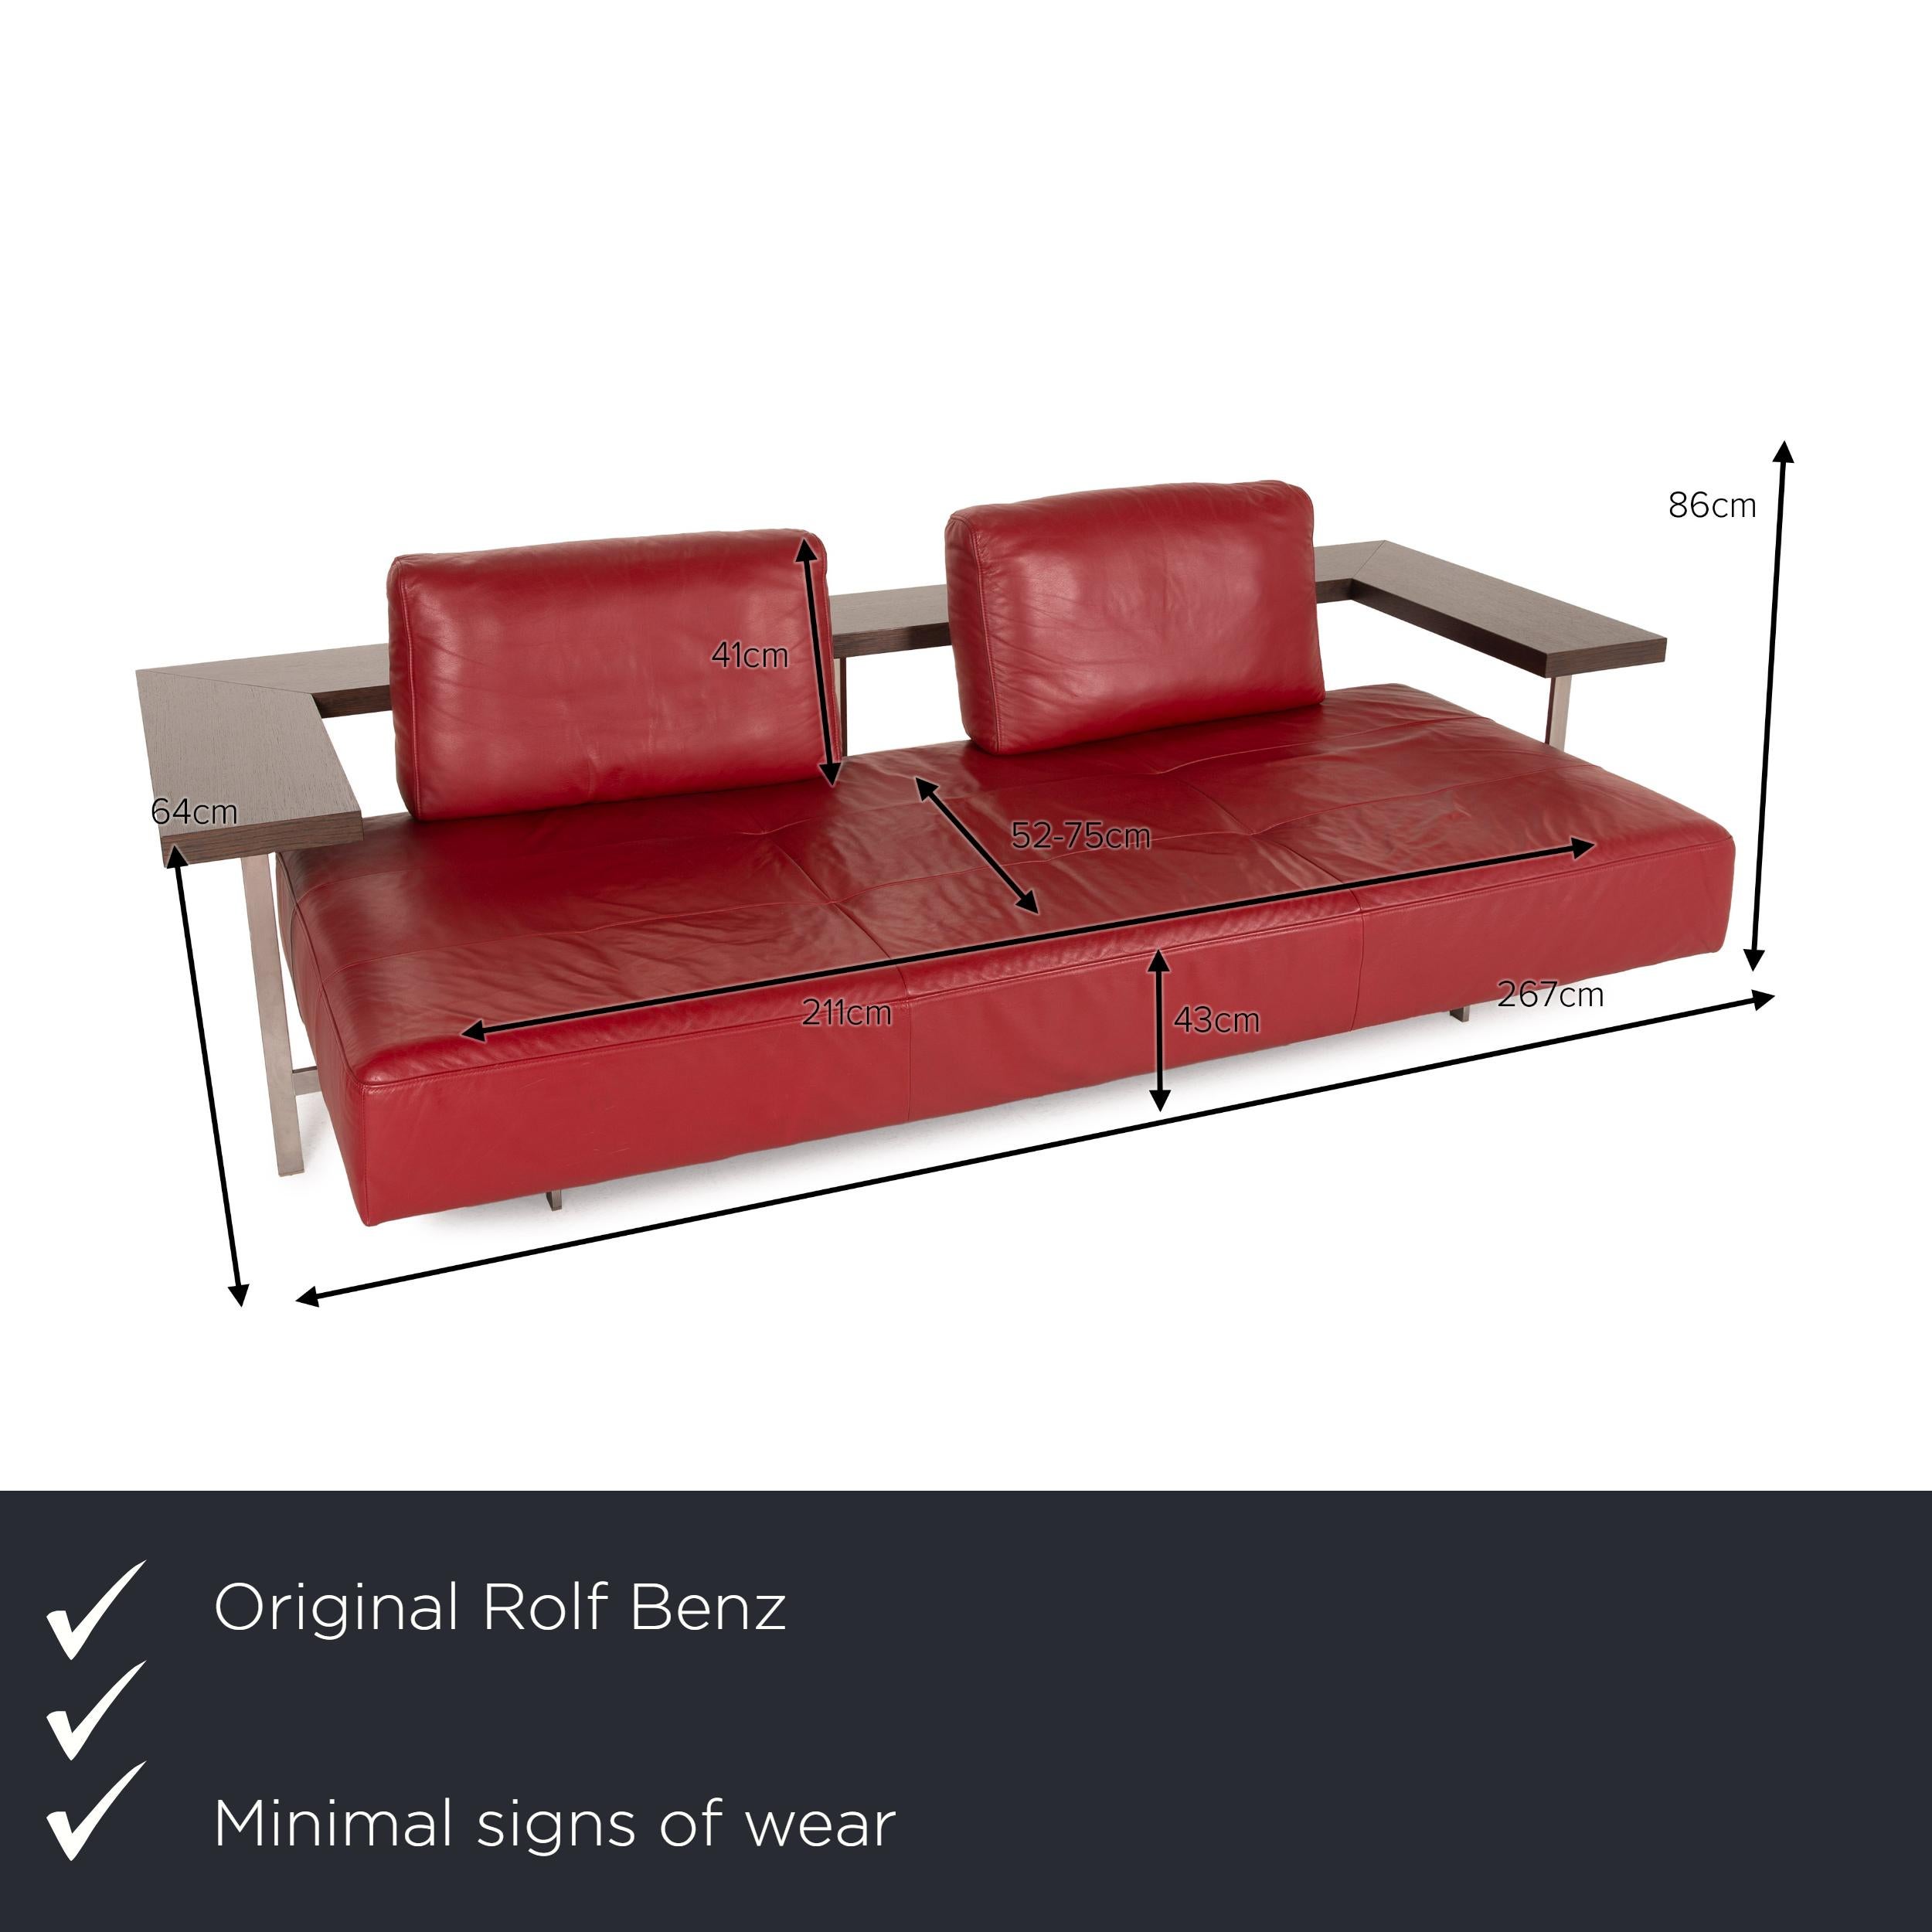 We present to you a Rolf Benz Dono leather sofa red two-seater couch.
 SKU: #16907-c3
 

 Product measurements in centimeters:
 

 depth: 106
 width: 267
 height: 86
 seat height: 43
 rest height: 64
 seat depth: 52
 seat width: 211
